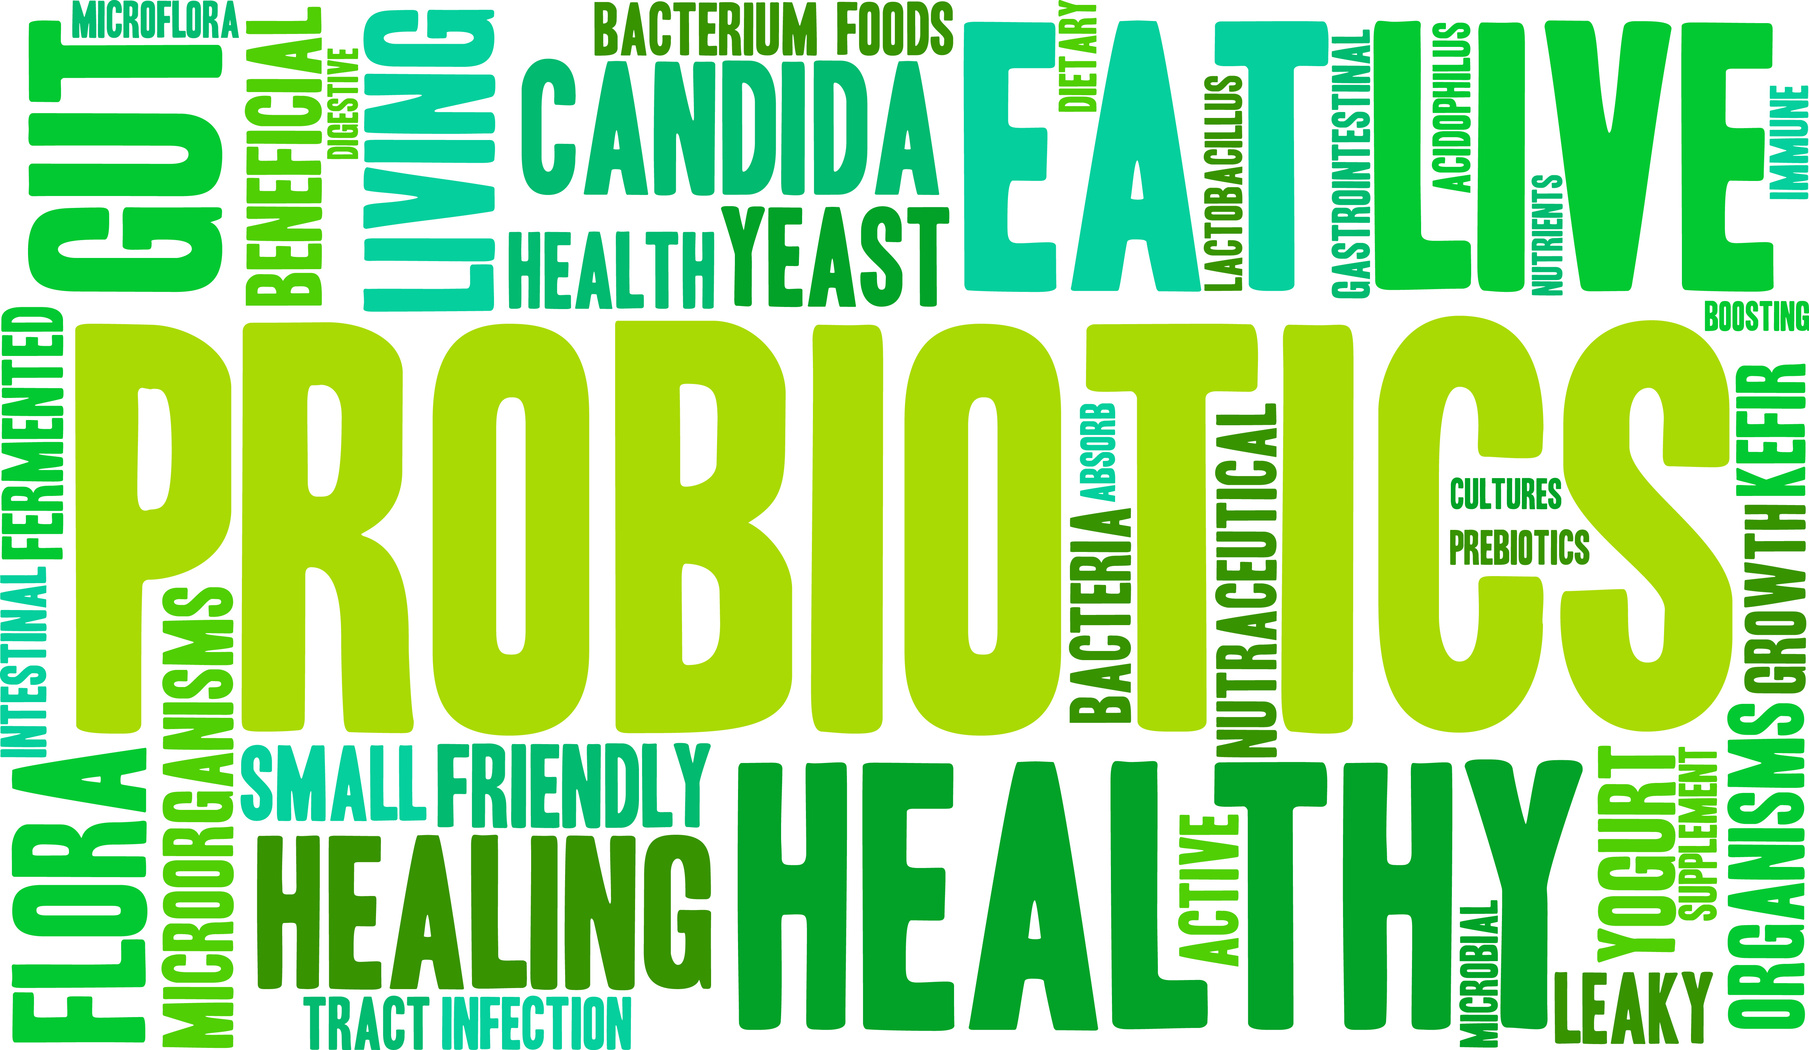 Probiotics: What are they and Why do I need them? Free Seminar